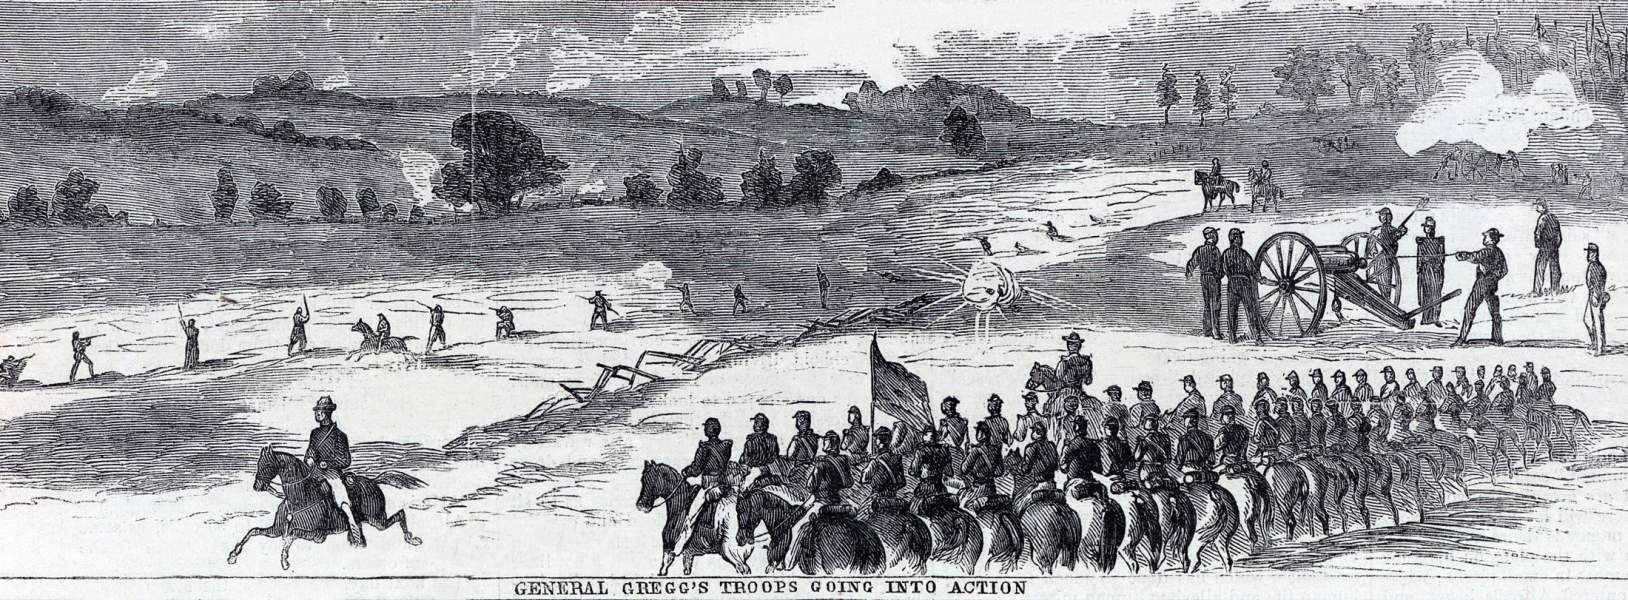 Union cavalry going into action at Culpeper Courthouse, Virginia, September 13, 1863, artist's impression, zoomable image